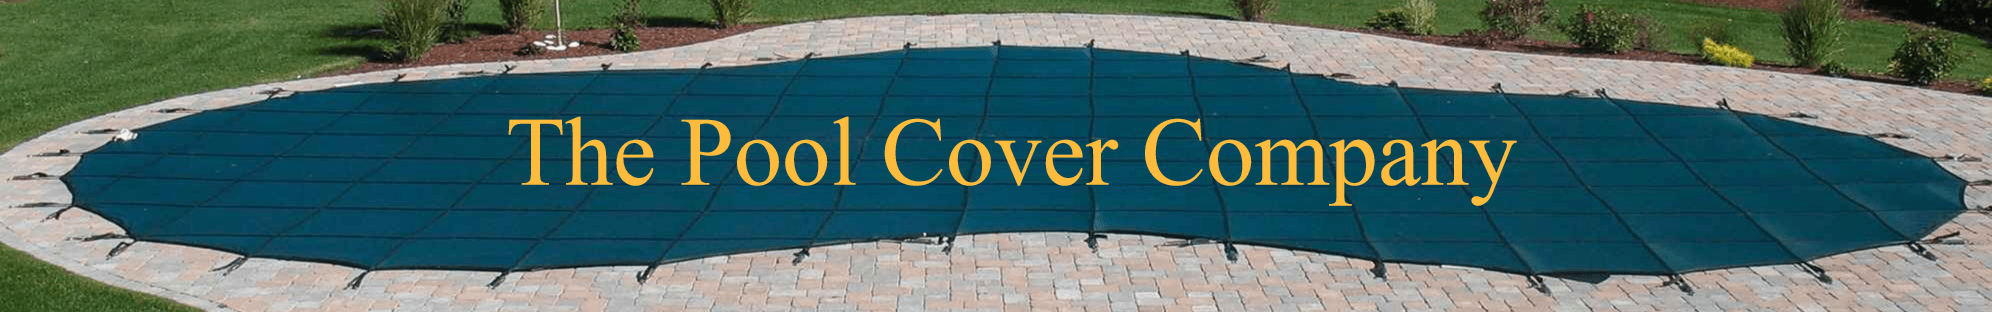 buy pool covers you can walk on